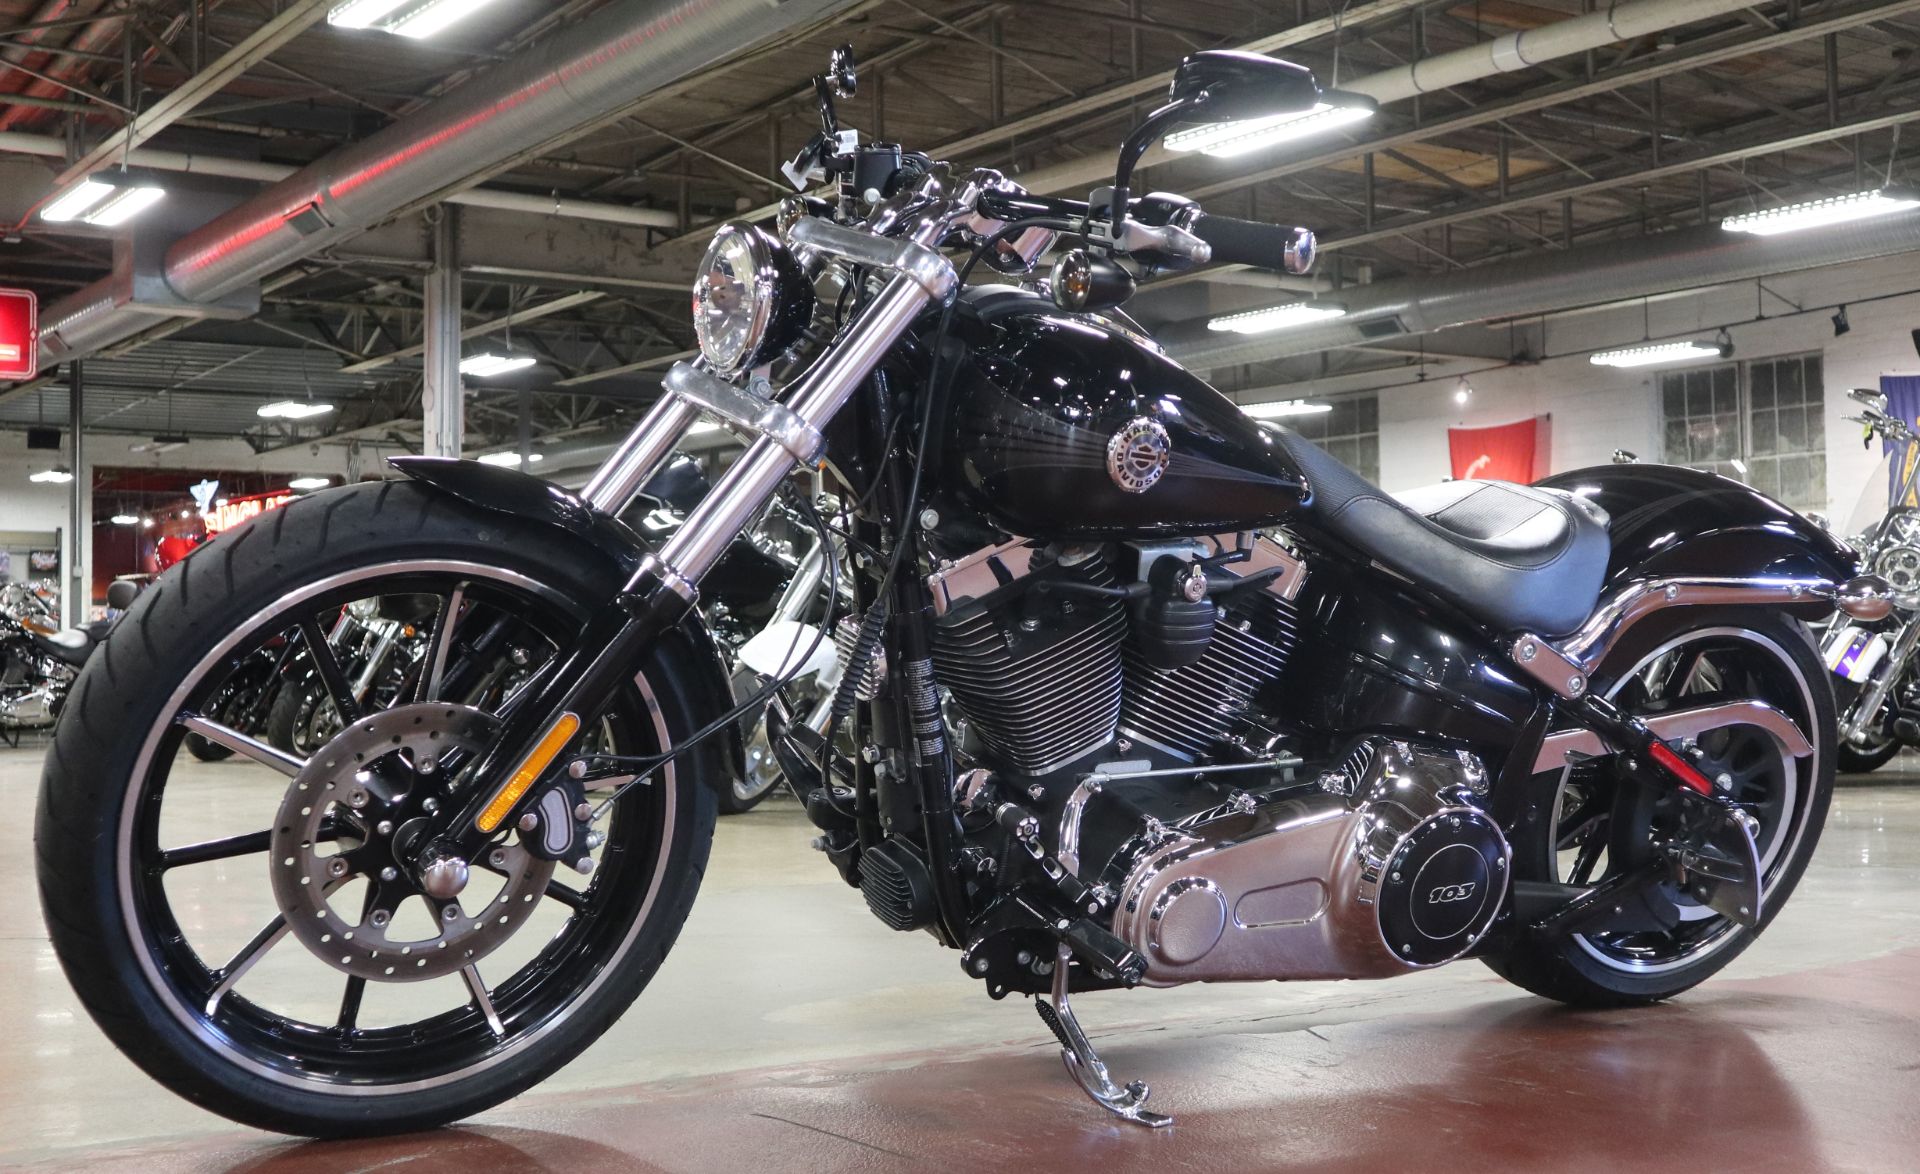 2014 Harley-Davidson Breakout® in New London, Connecticut - Photo 4